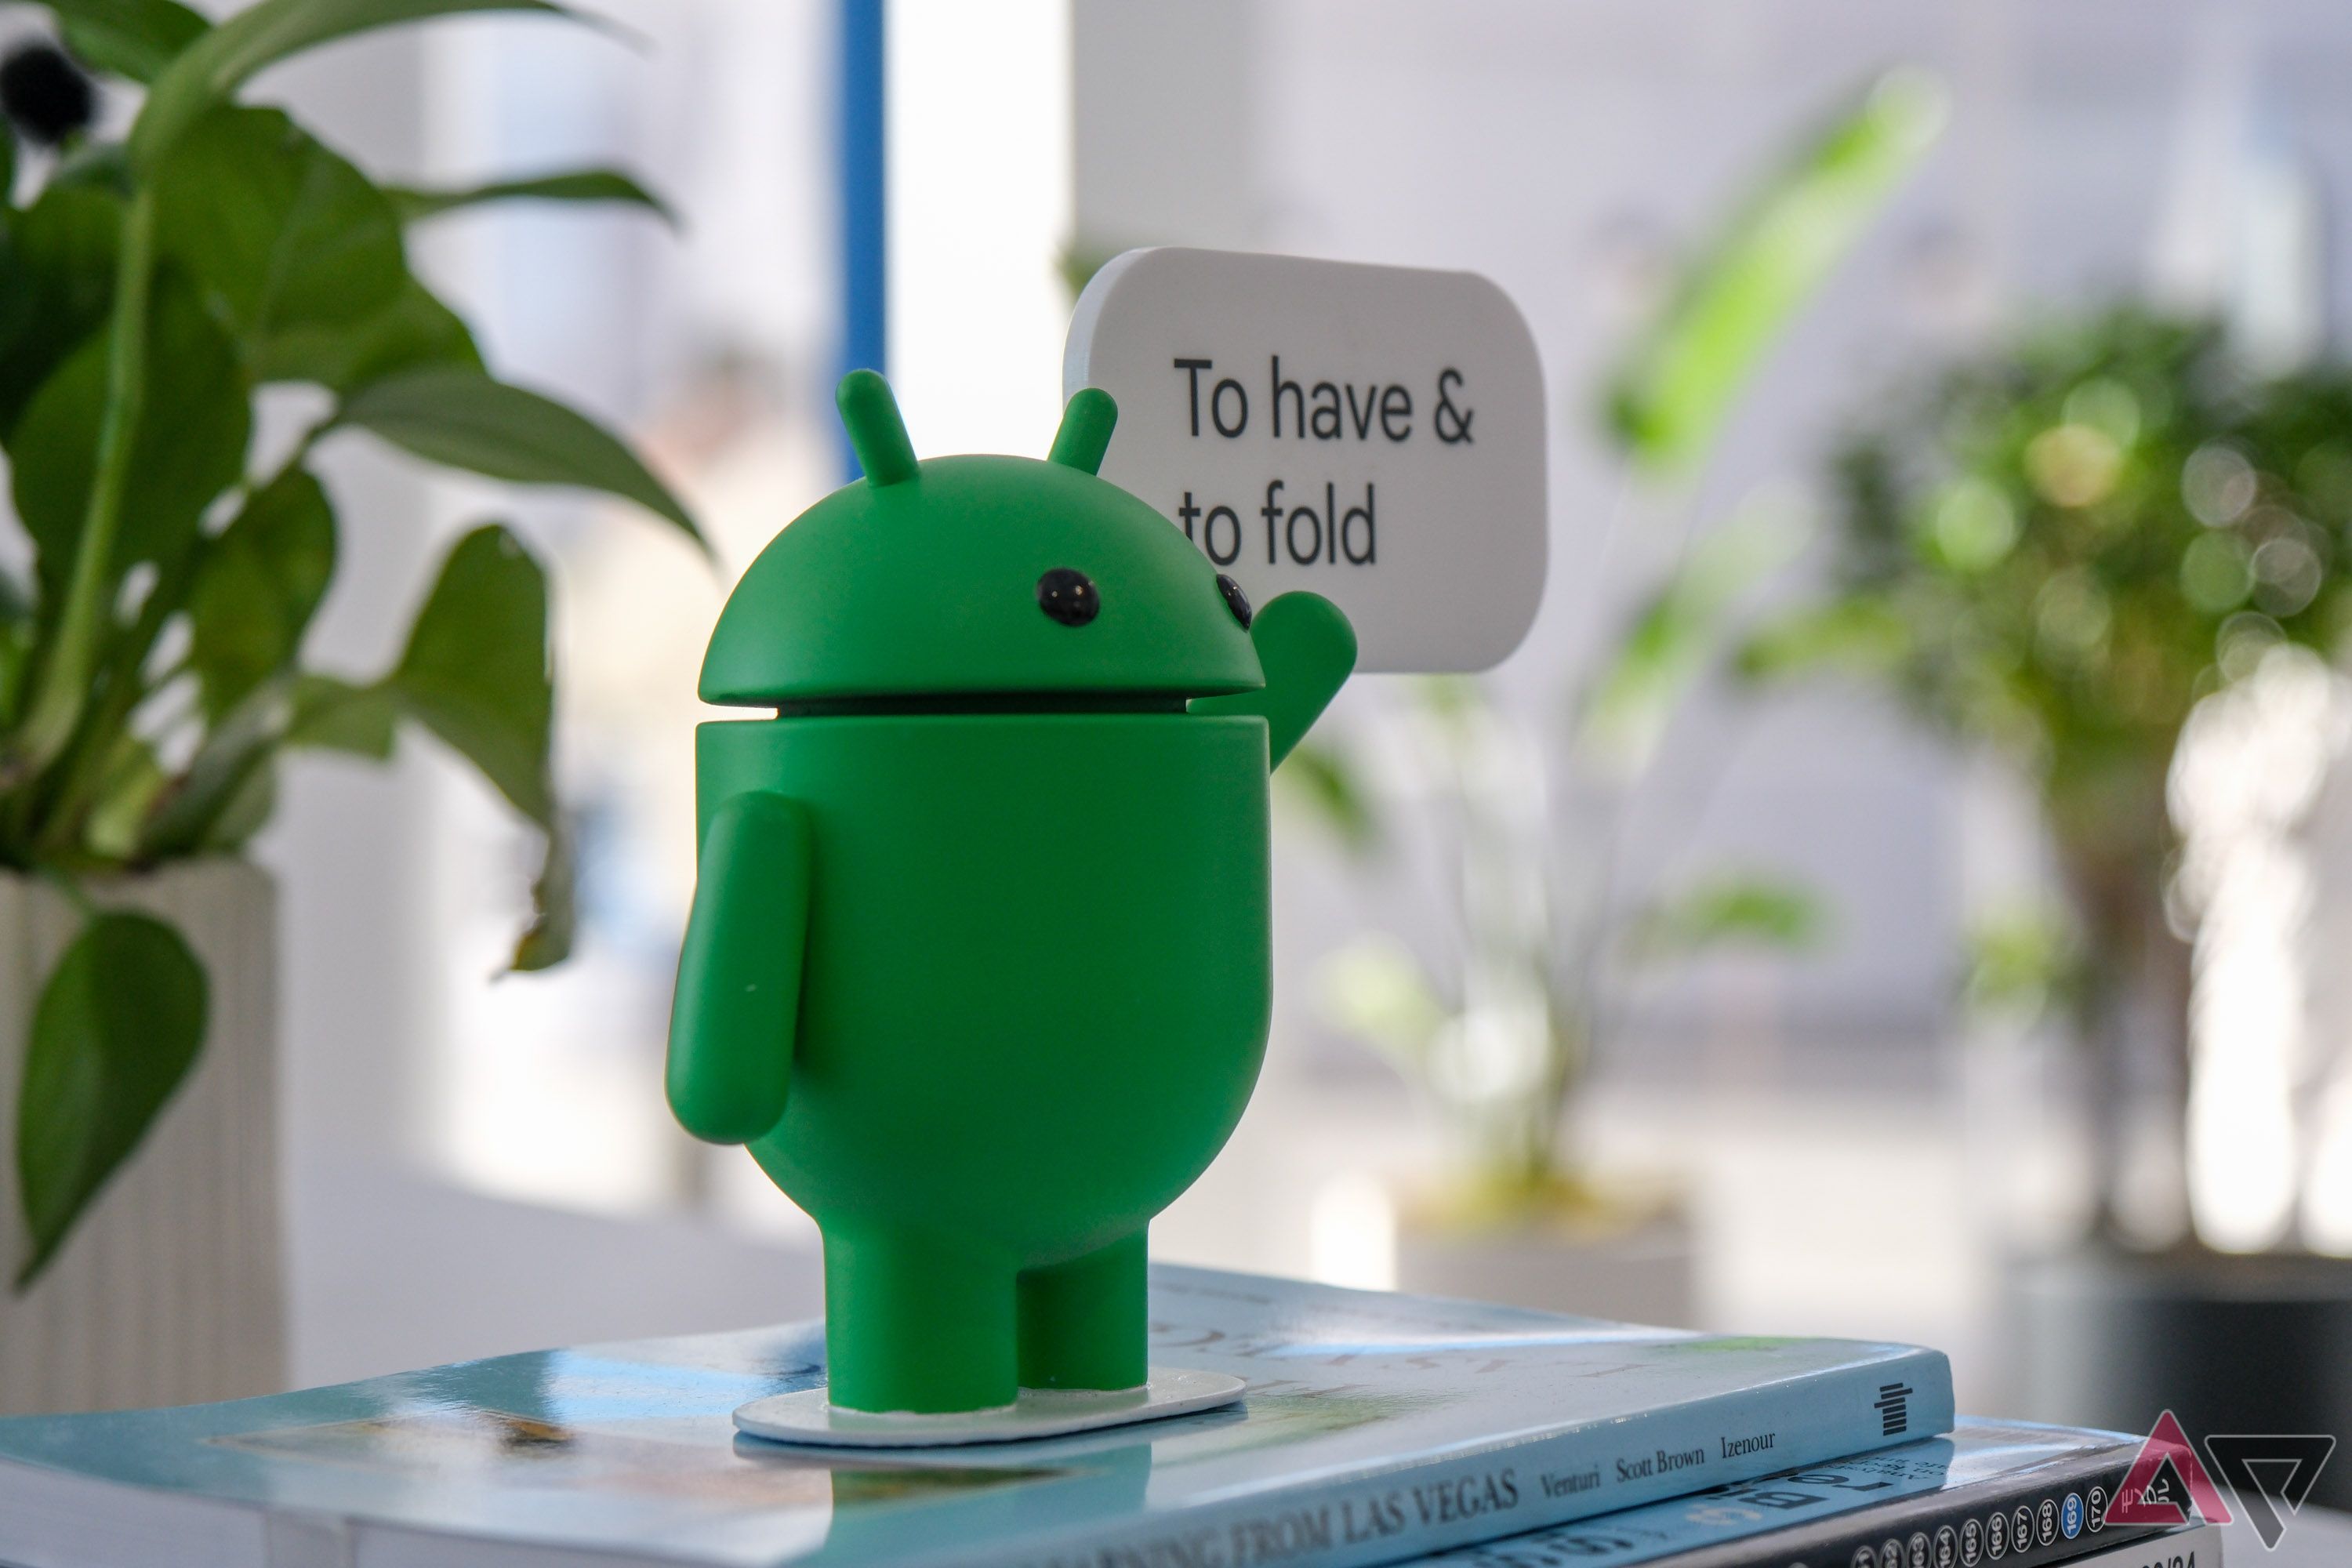 An Android mascot with a sign that says 'To have & to fold'